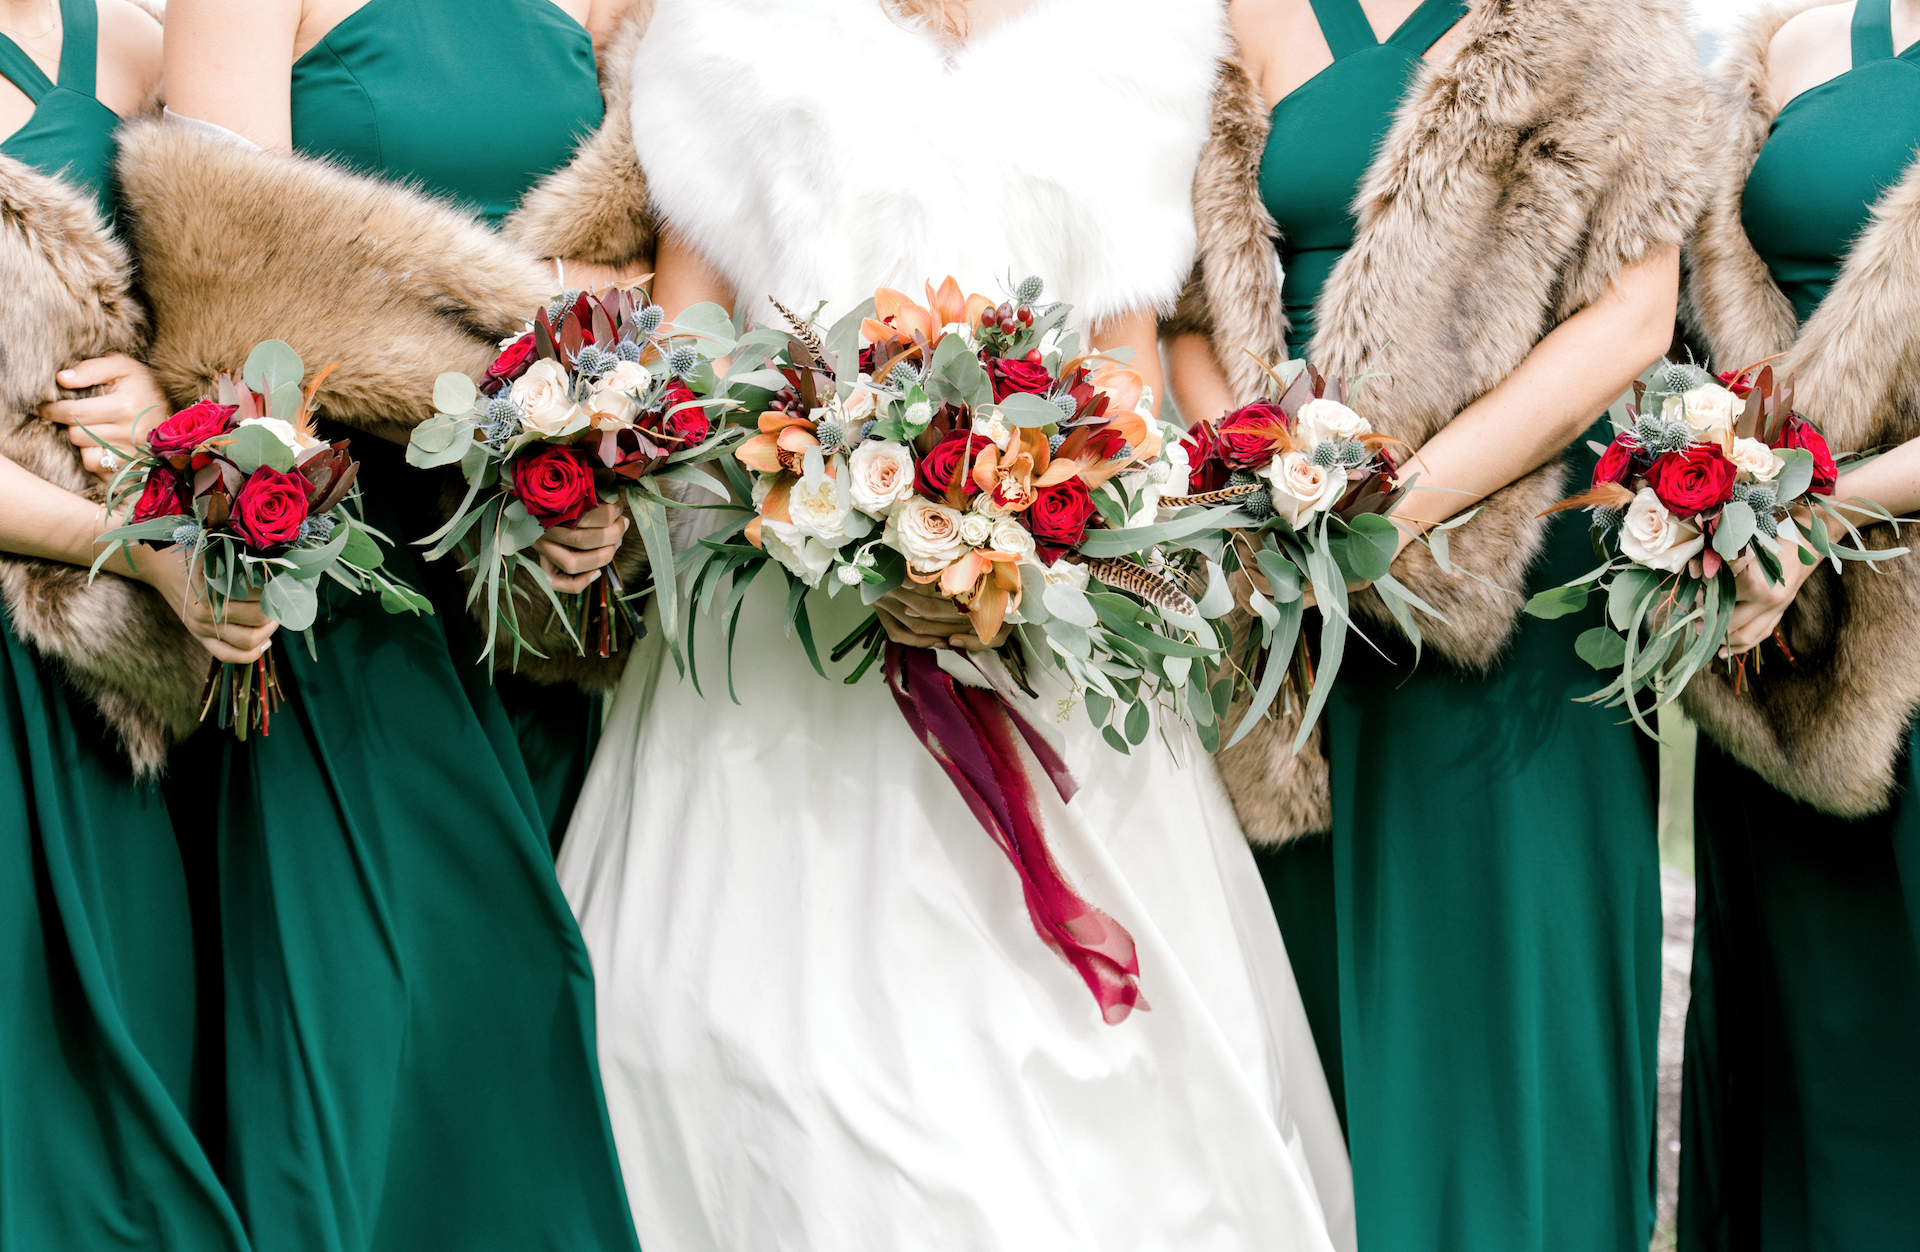 Bridesmaids and and bride holding fall wedding bouquets in emerald green dresses